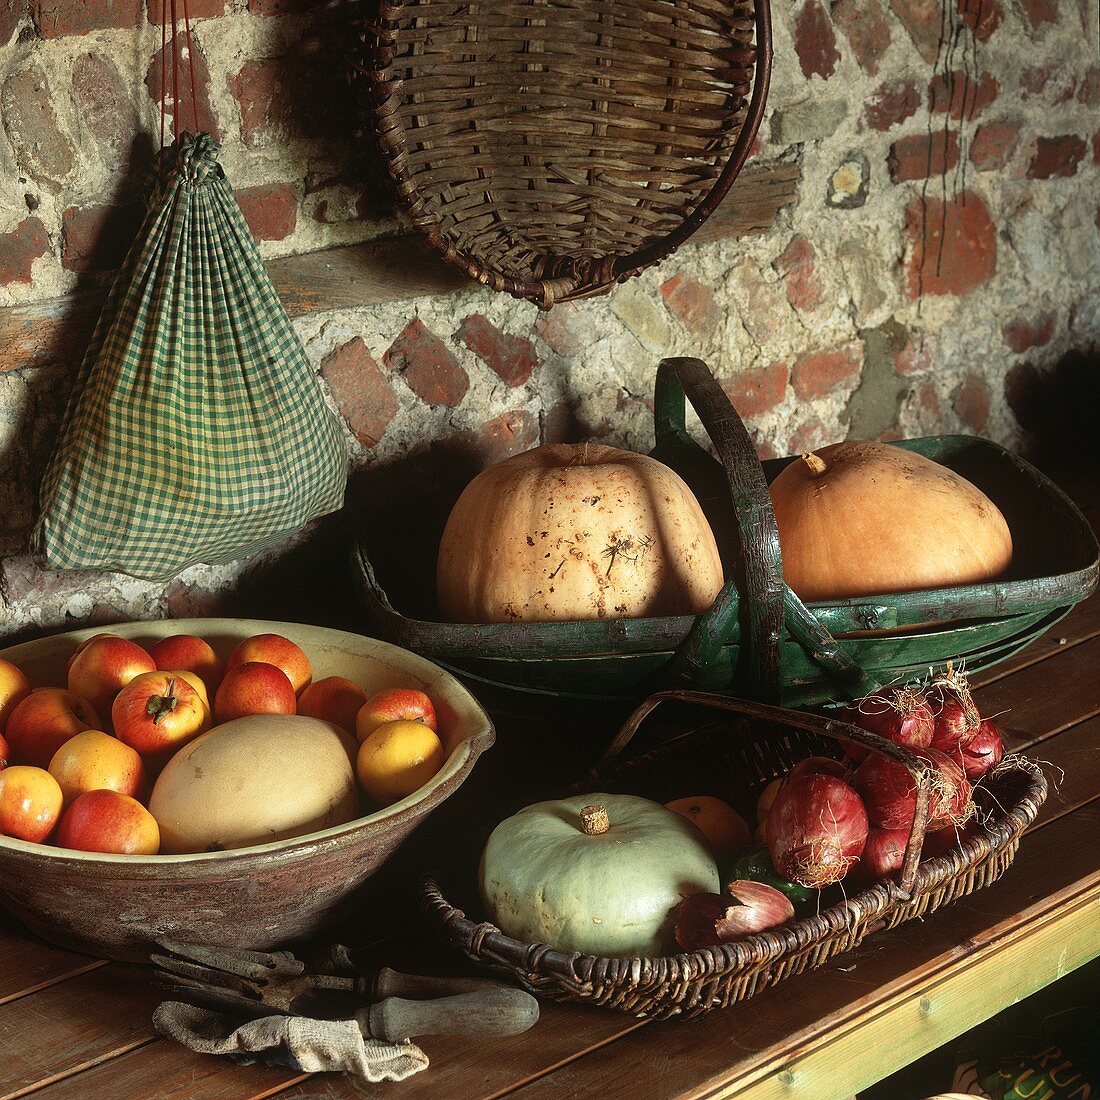 A display of pumpkins, onions and apples